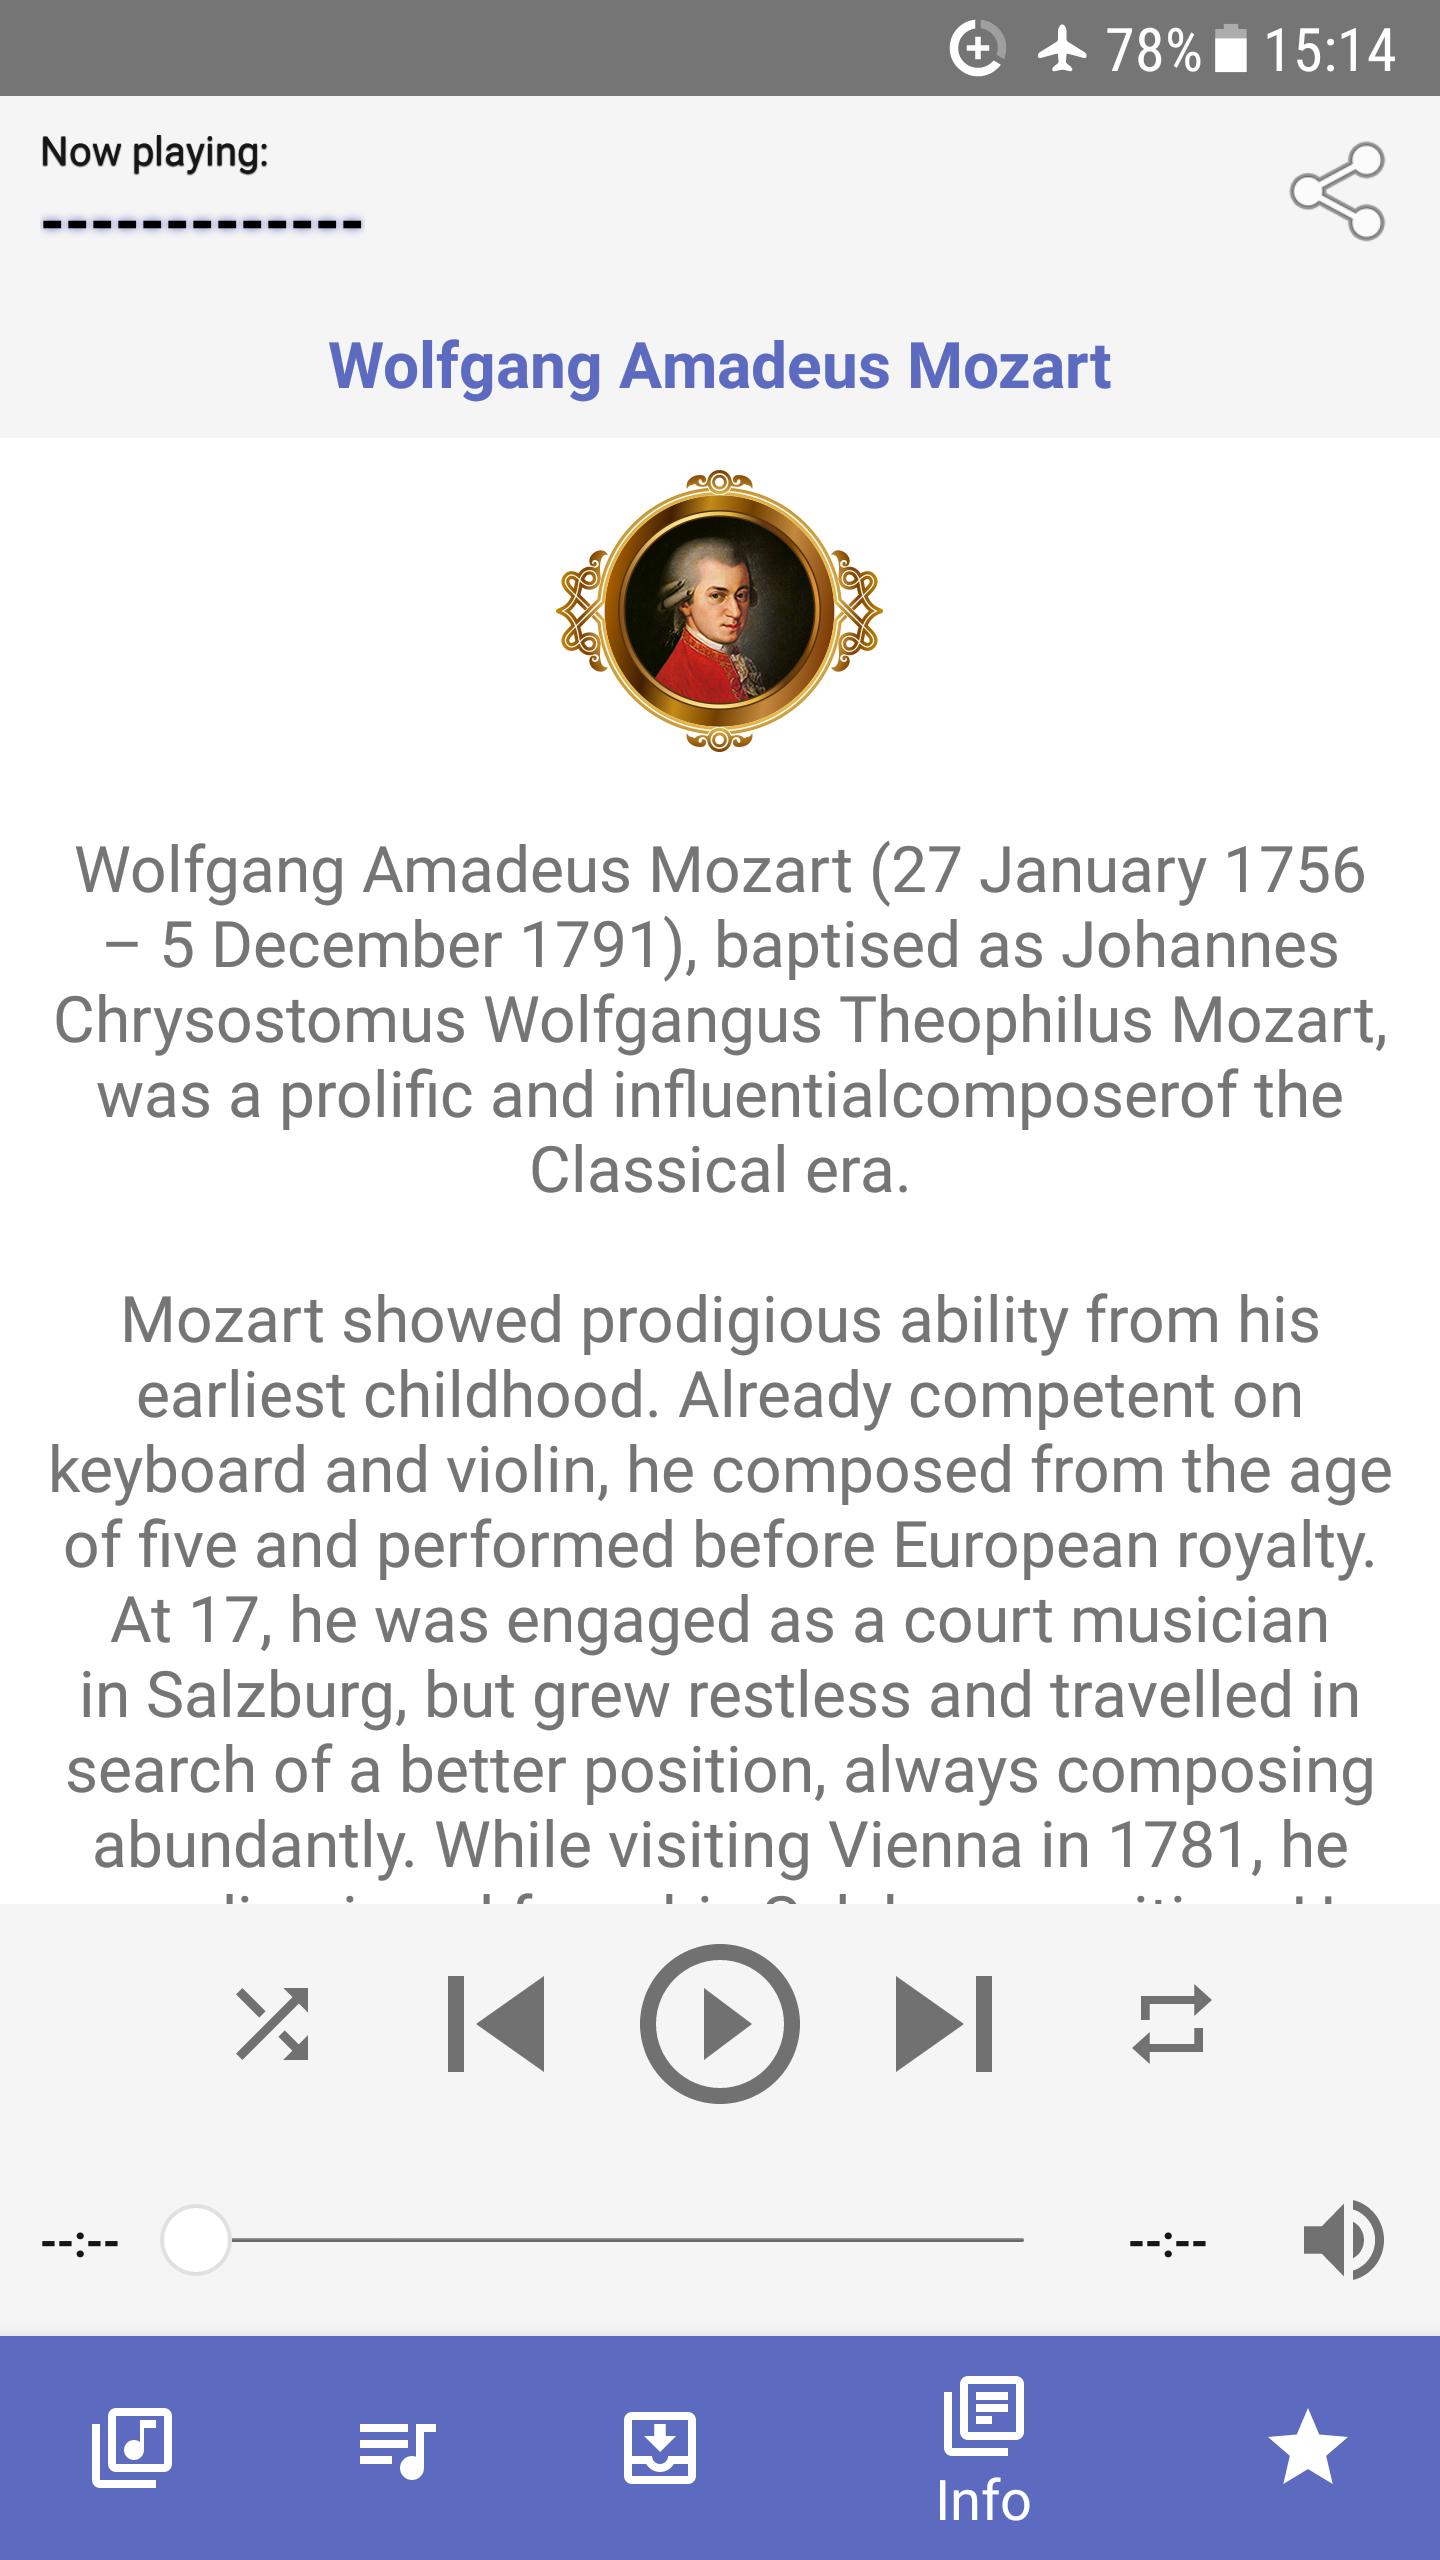 Wolfgang Amadeus Mozart Music for Android - APK Download